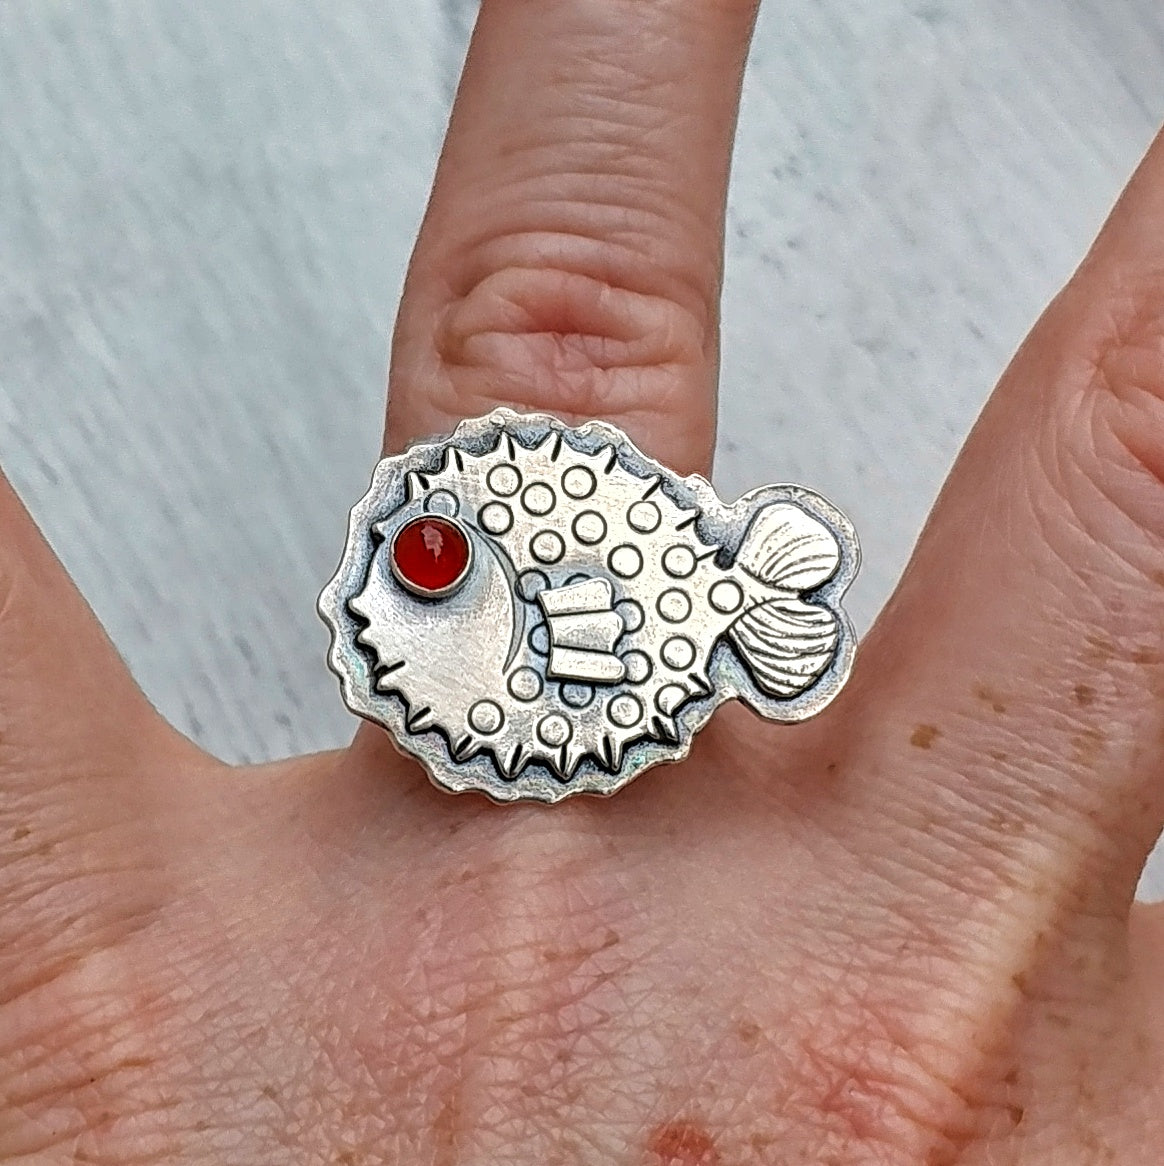 Puffer fish ring on finger with carnelian eye